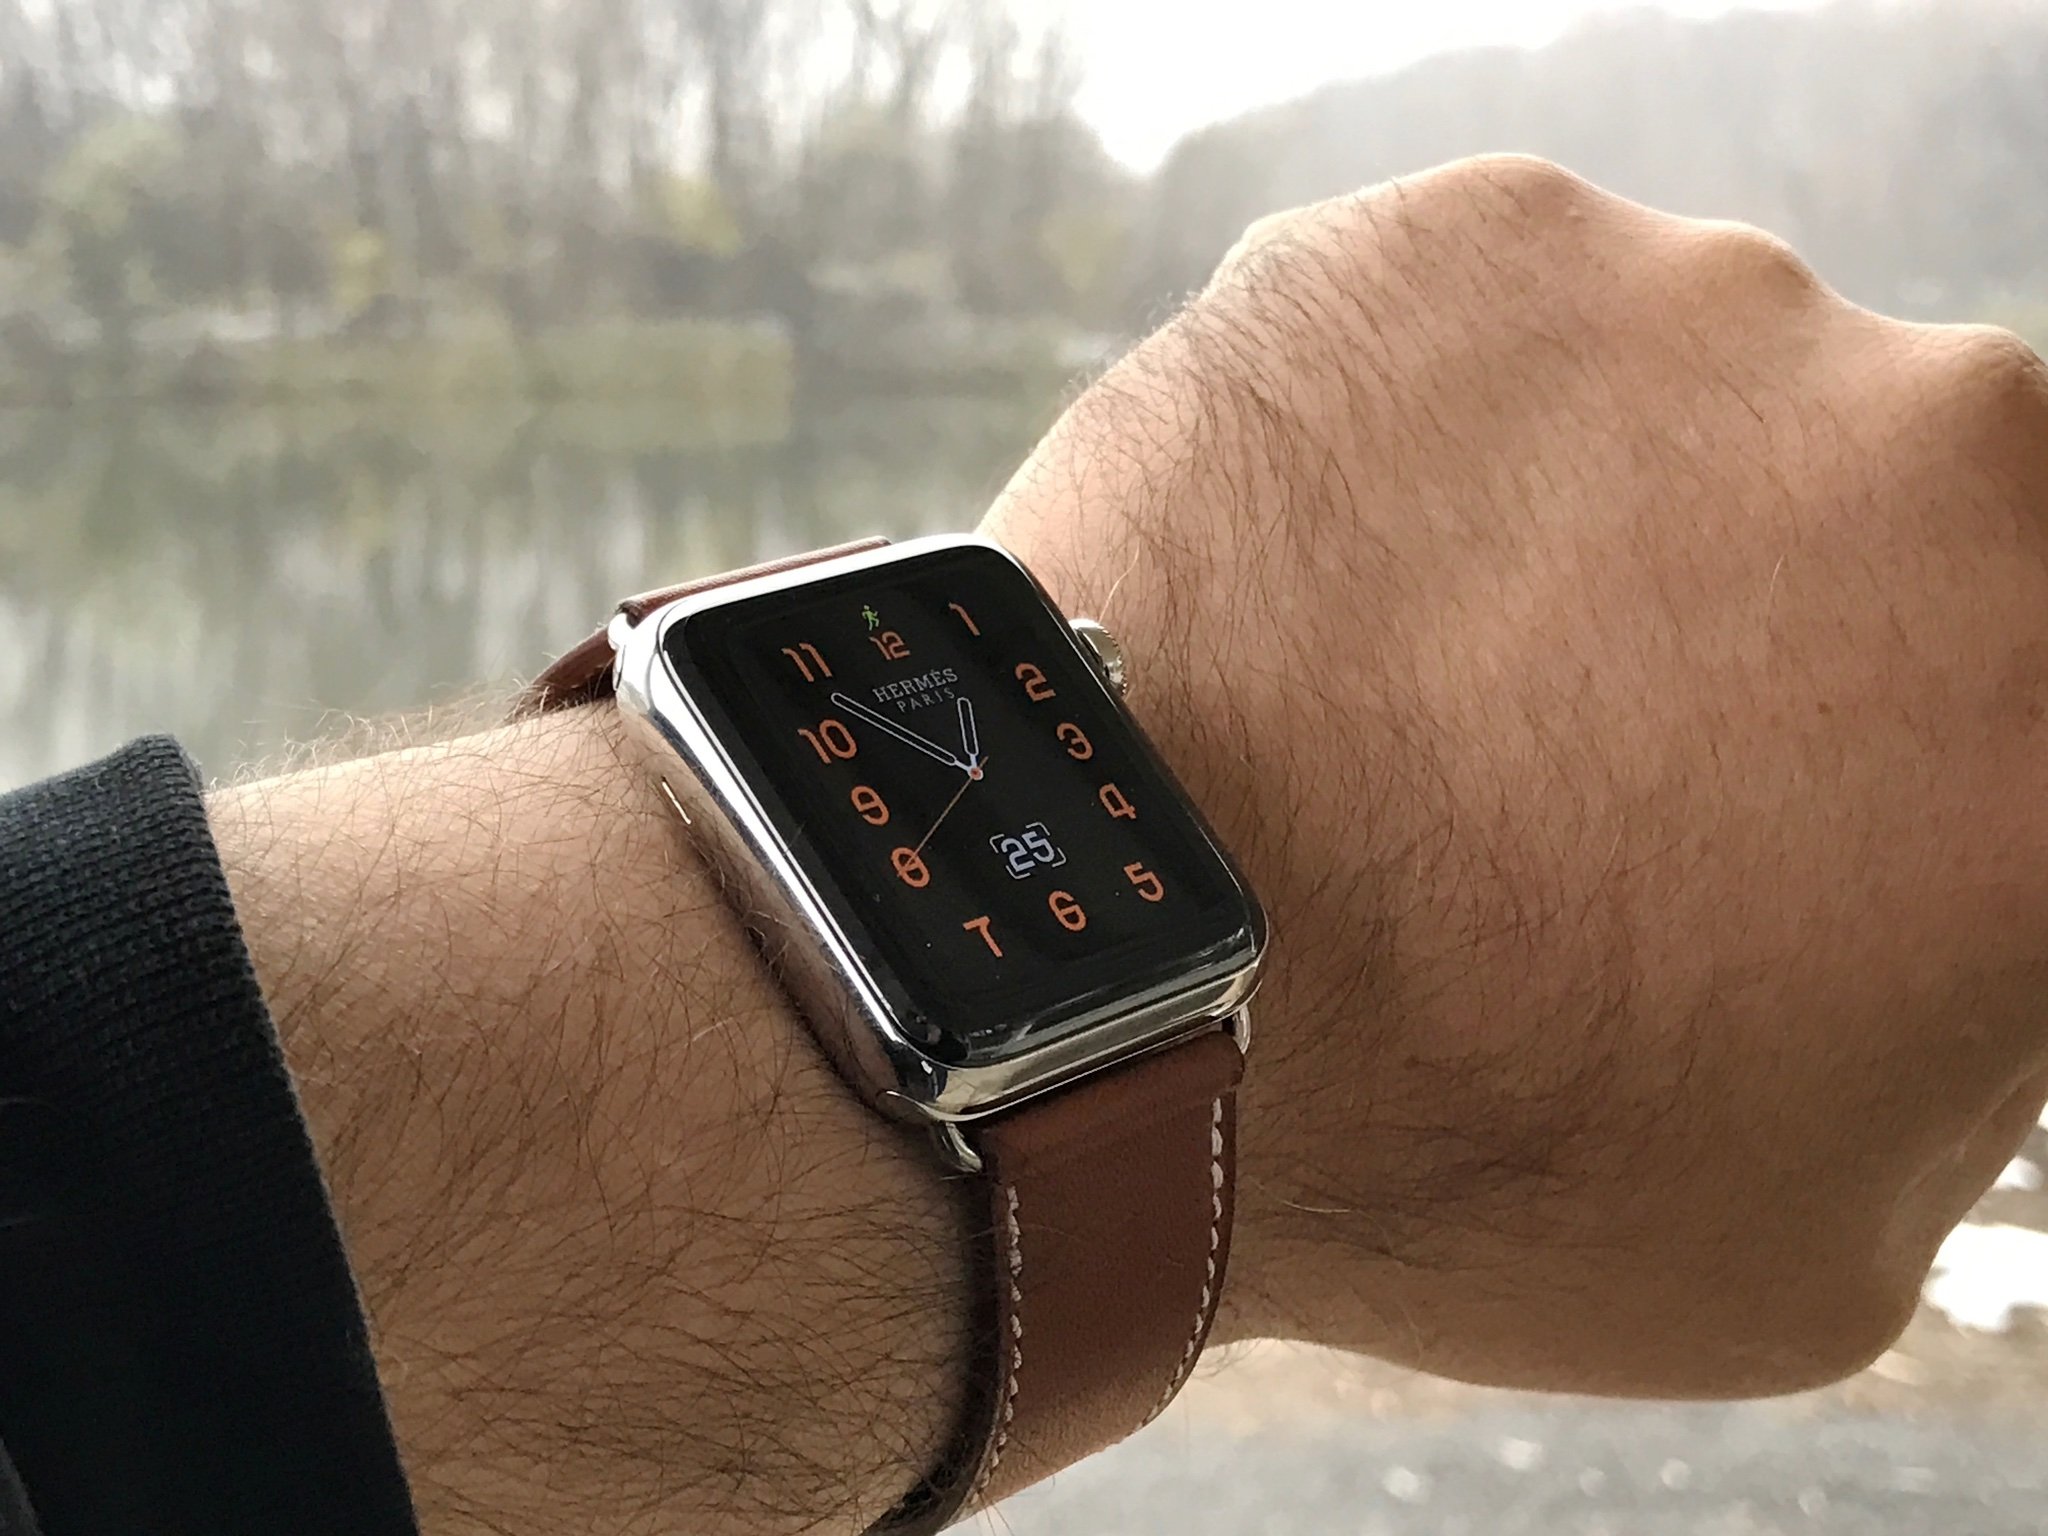 Stainless Steel Or Aluminum Apple Watch